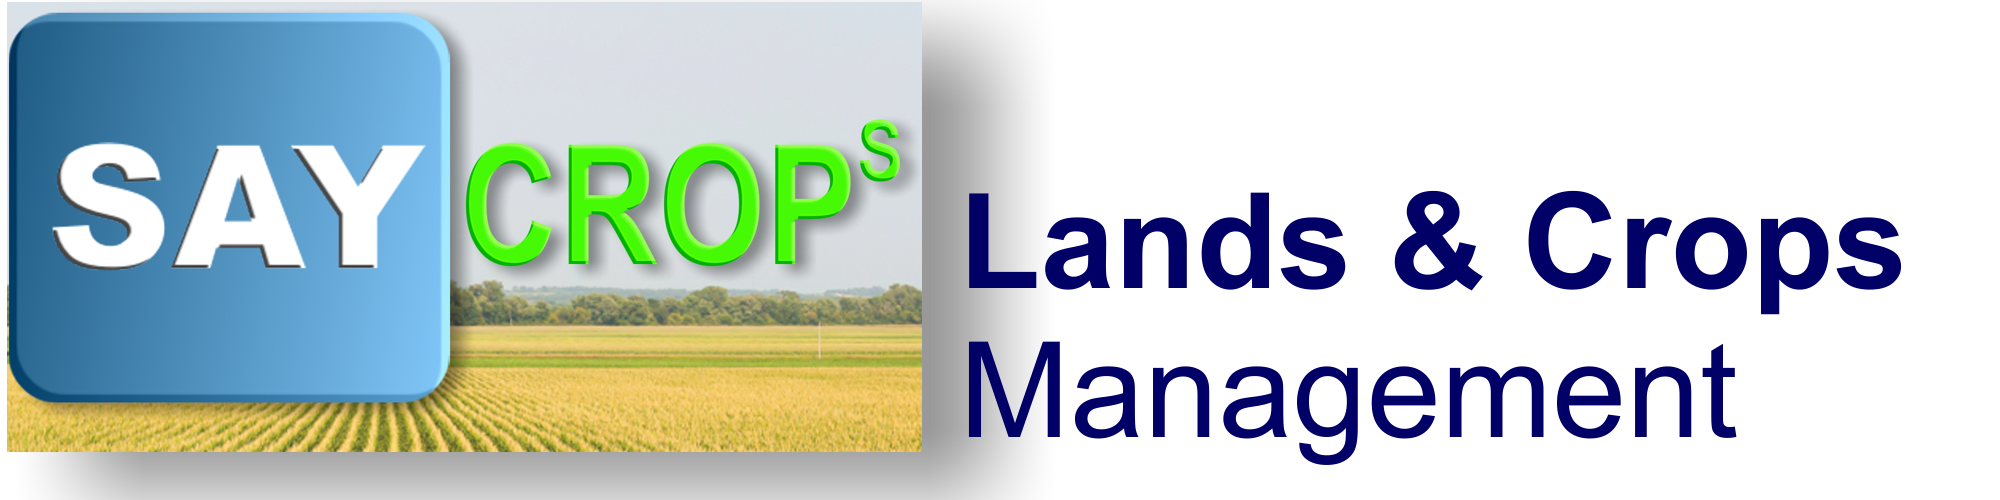 Quick access for the online Land Management Application